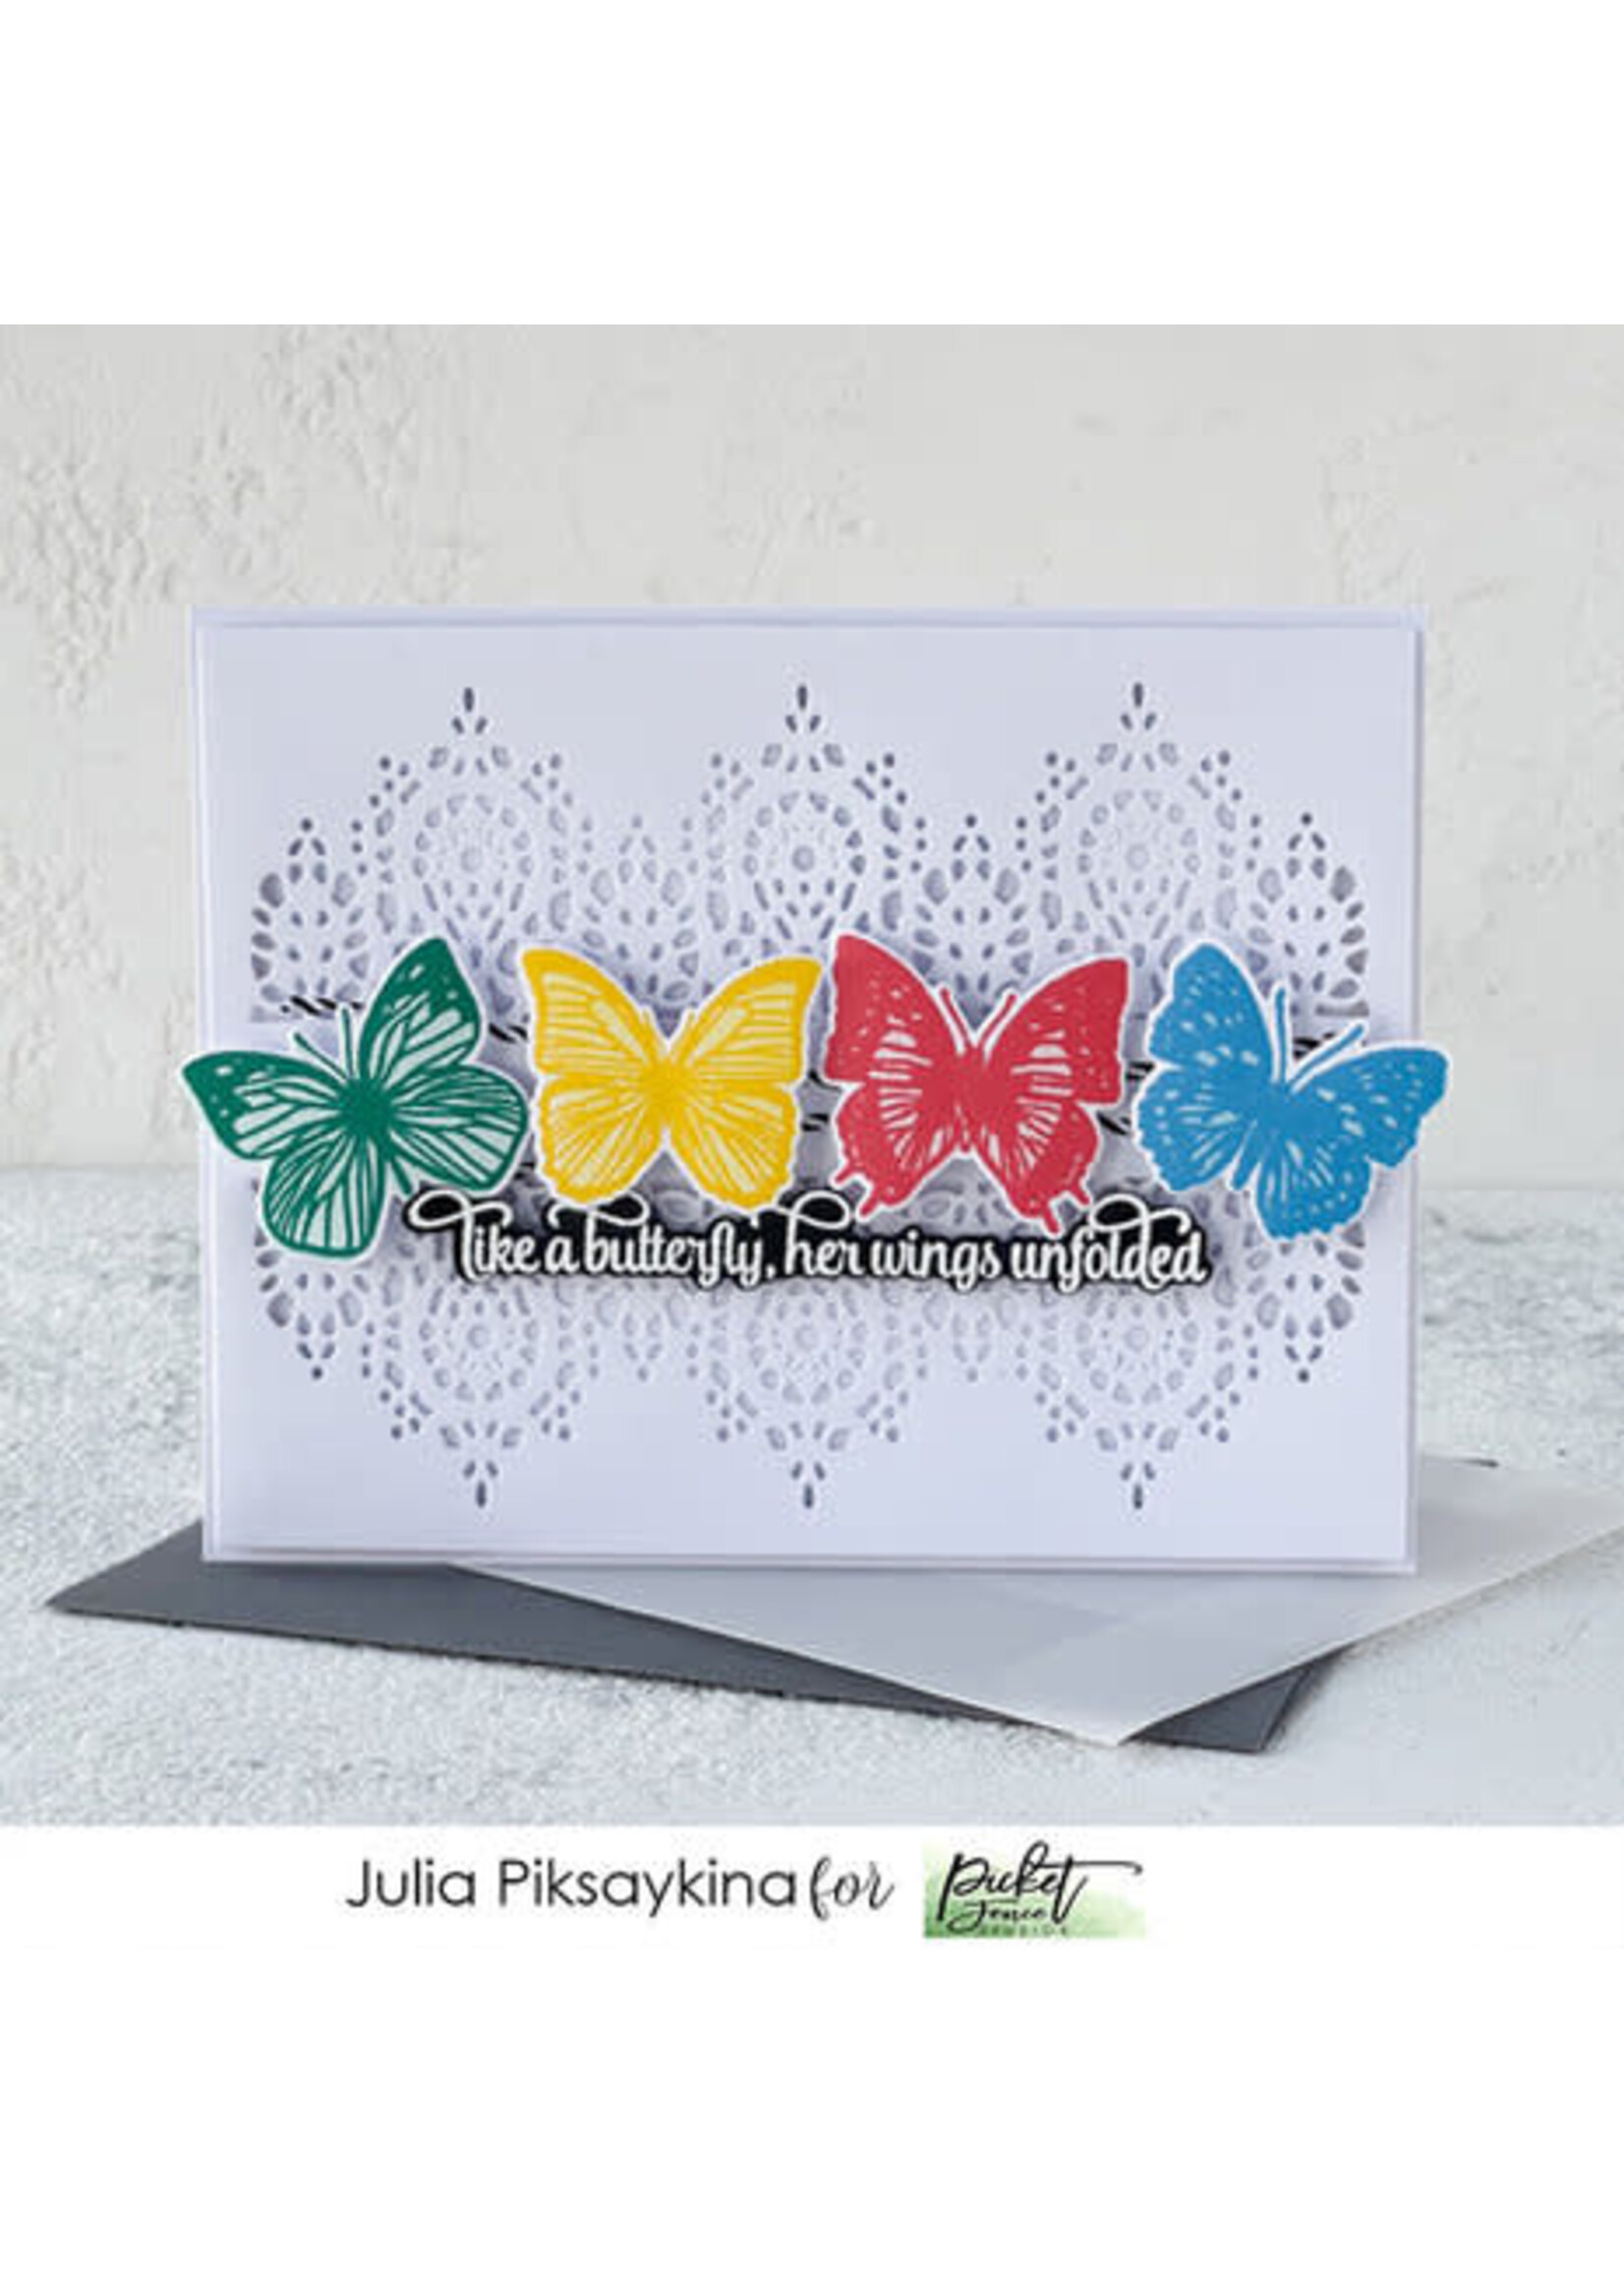 Picket Friends Butterfly Beauties 6x6 Inch Clear Stamps (A-158